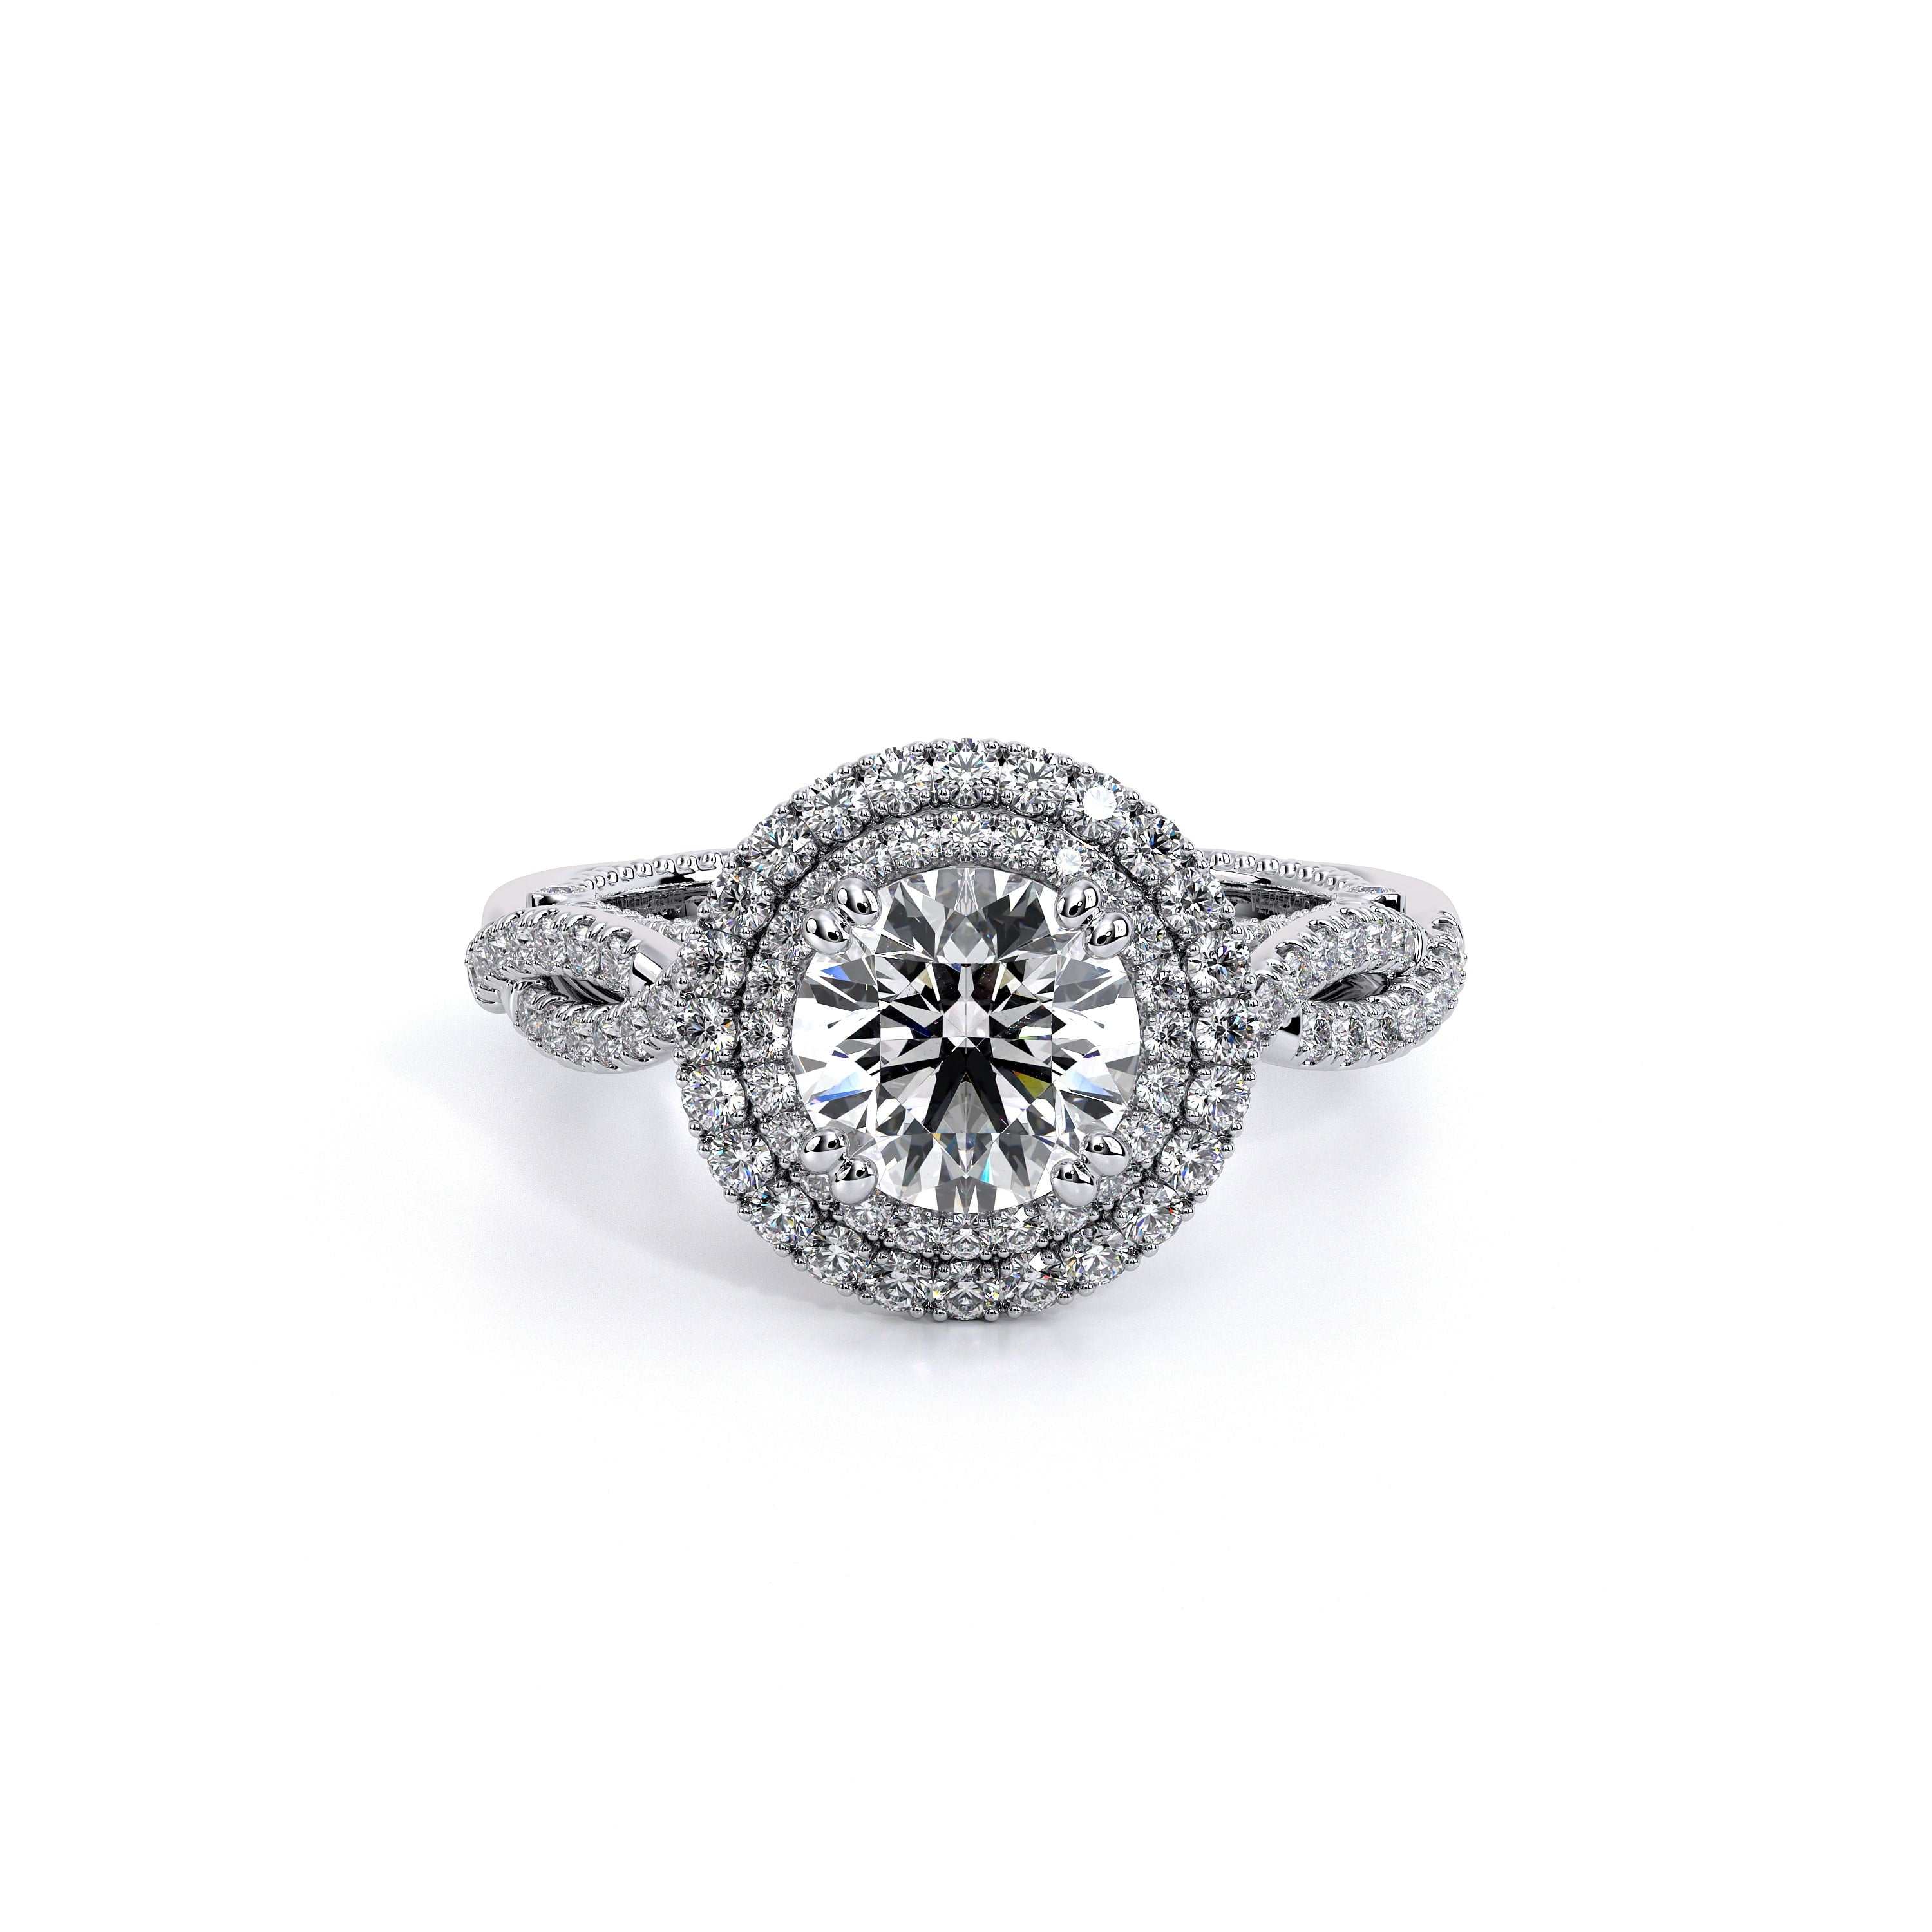 Round Brilliant Cut Halo Diamond Engagement Ring, Milgrain Bezel Set in a  Large Milgrain Bead set Halo on a Vintage Arrow Textured Band with Open  Leaf Undersetting.